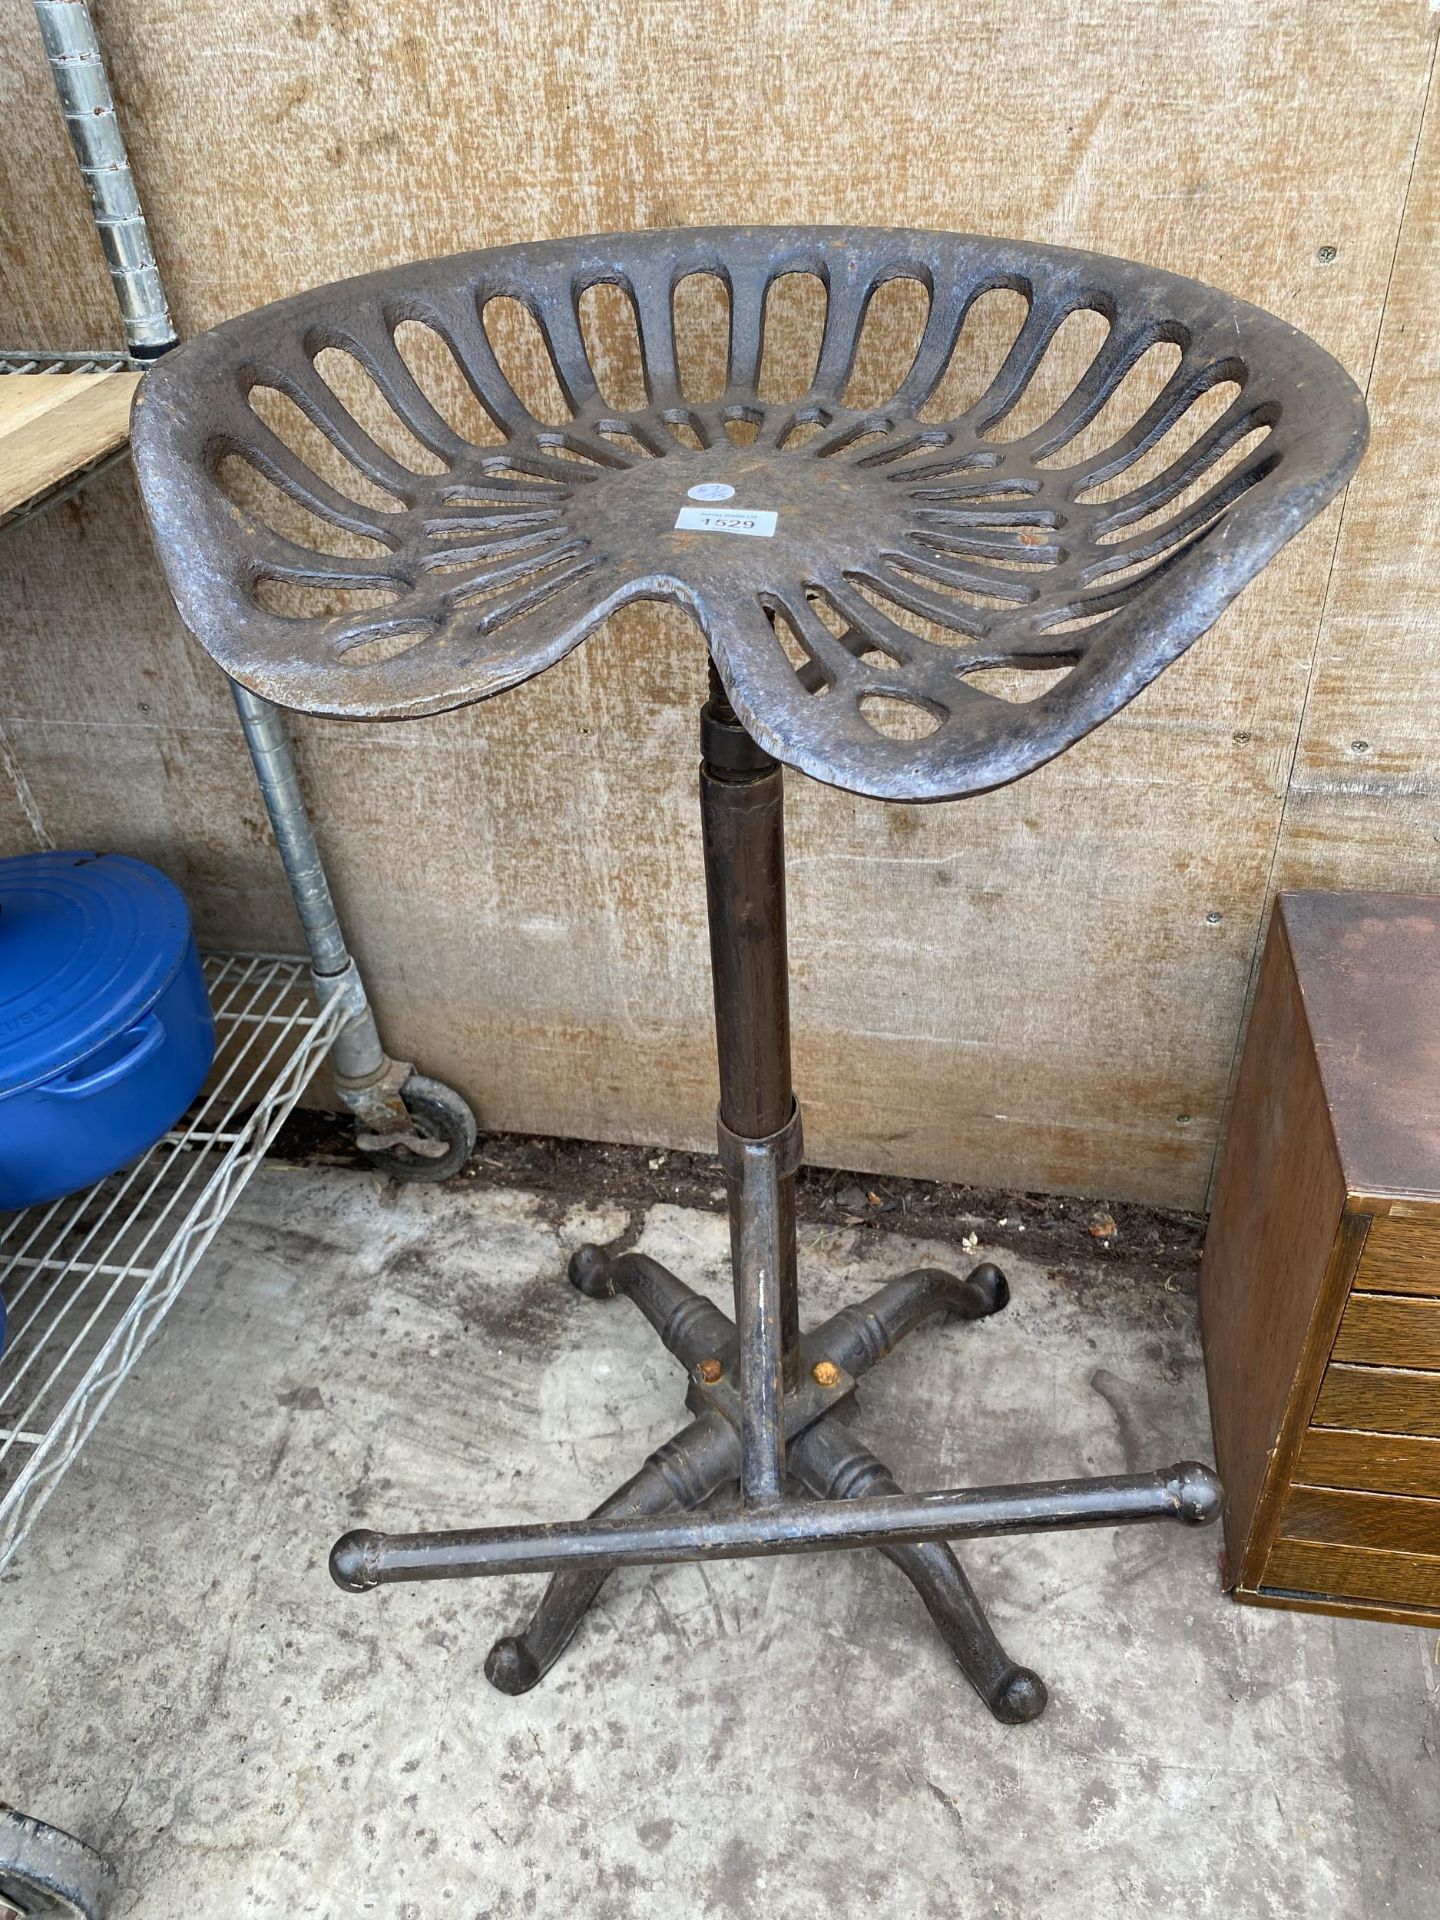 A VINTAGE STYLE TRACTOR SEAT STOOL